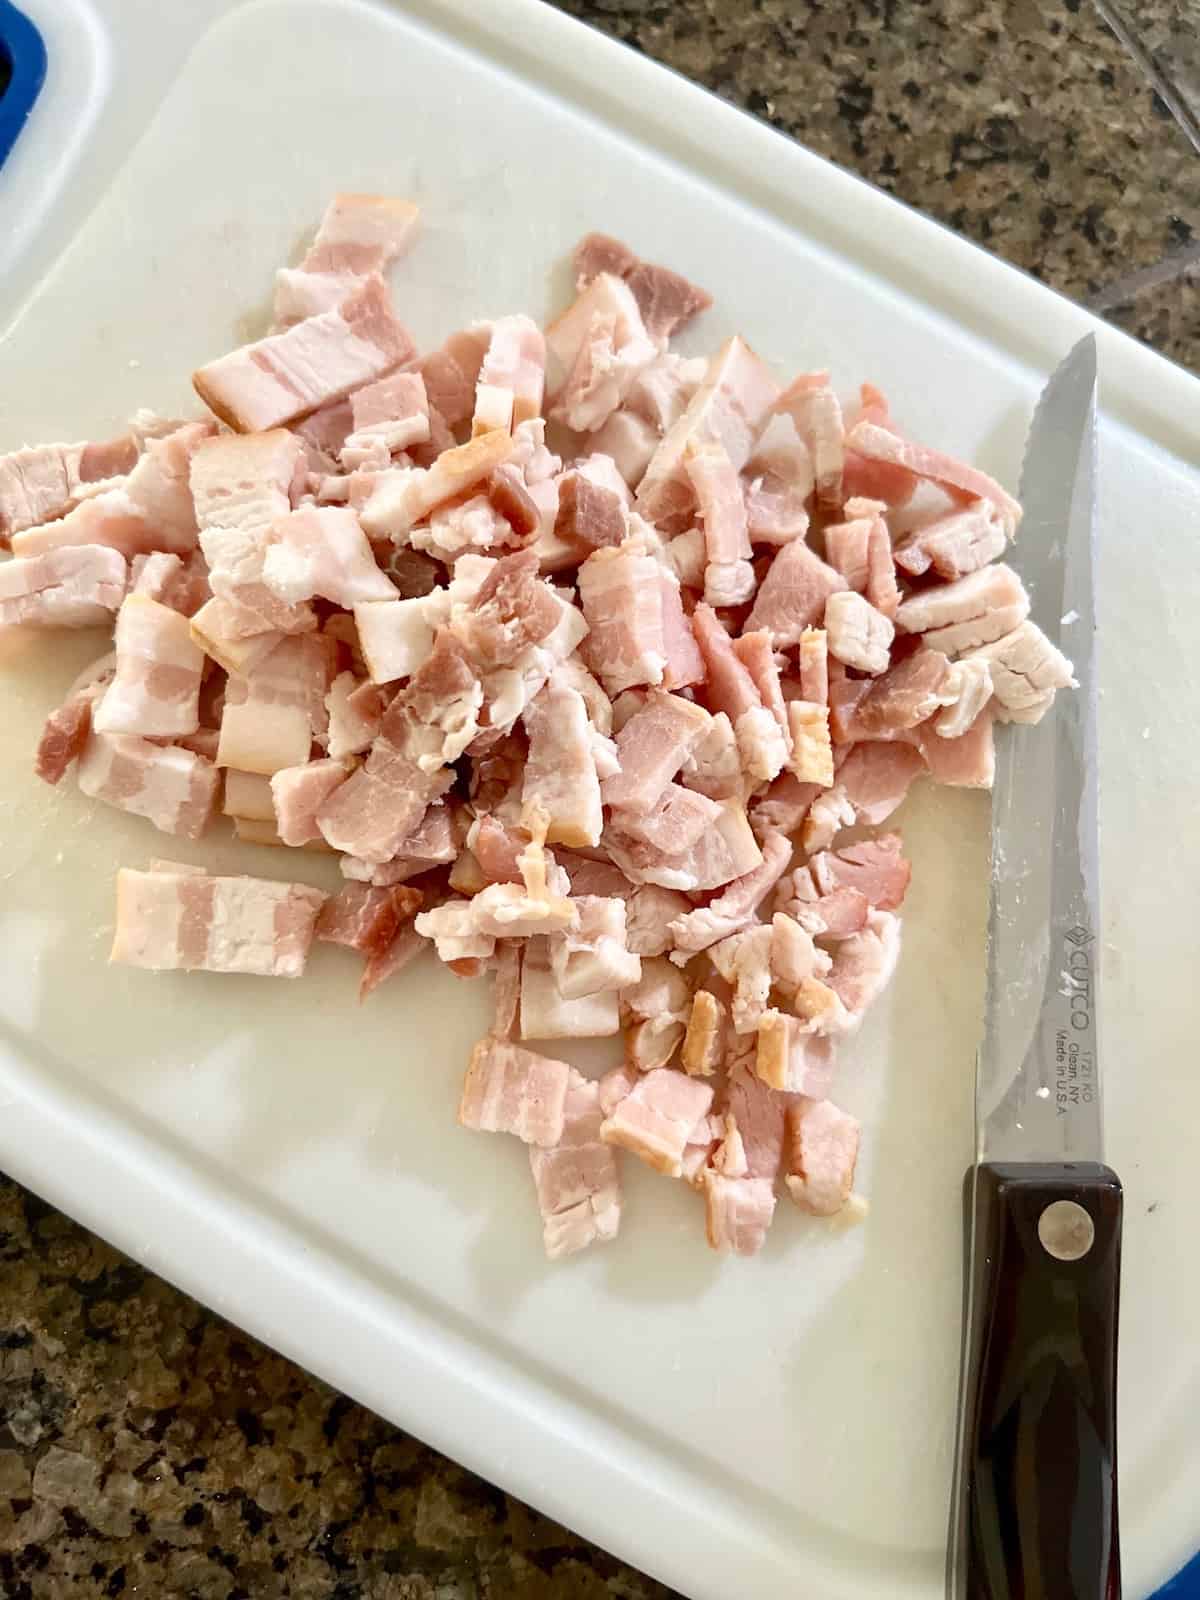 Diced up bacon on a cutting board.